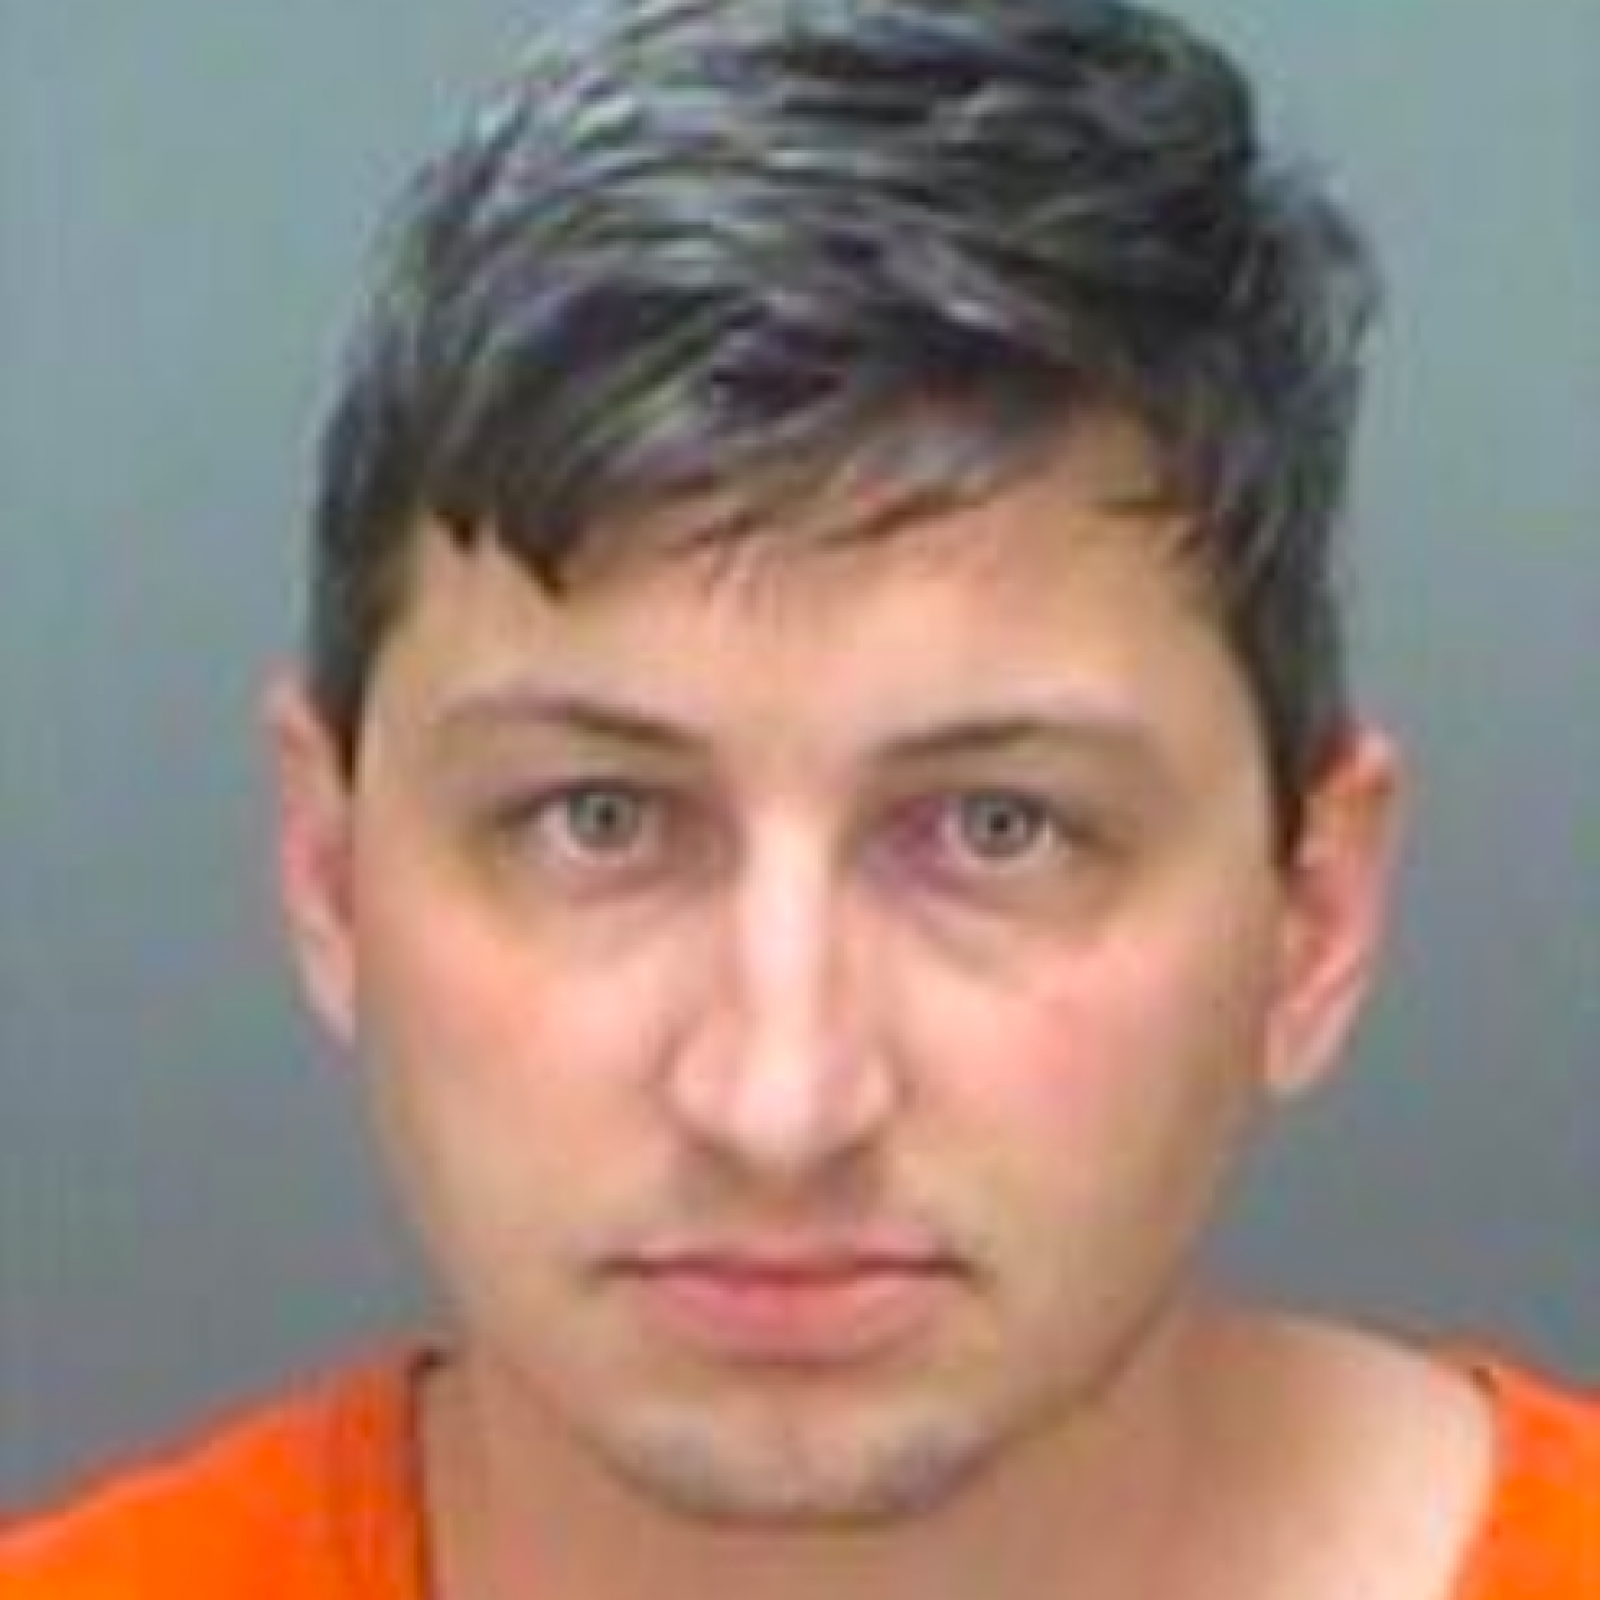 Making Babies Porn - Florida Man Accused of Making Child Porn With 2-Year-Old ...